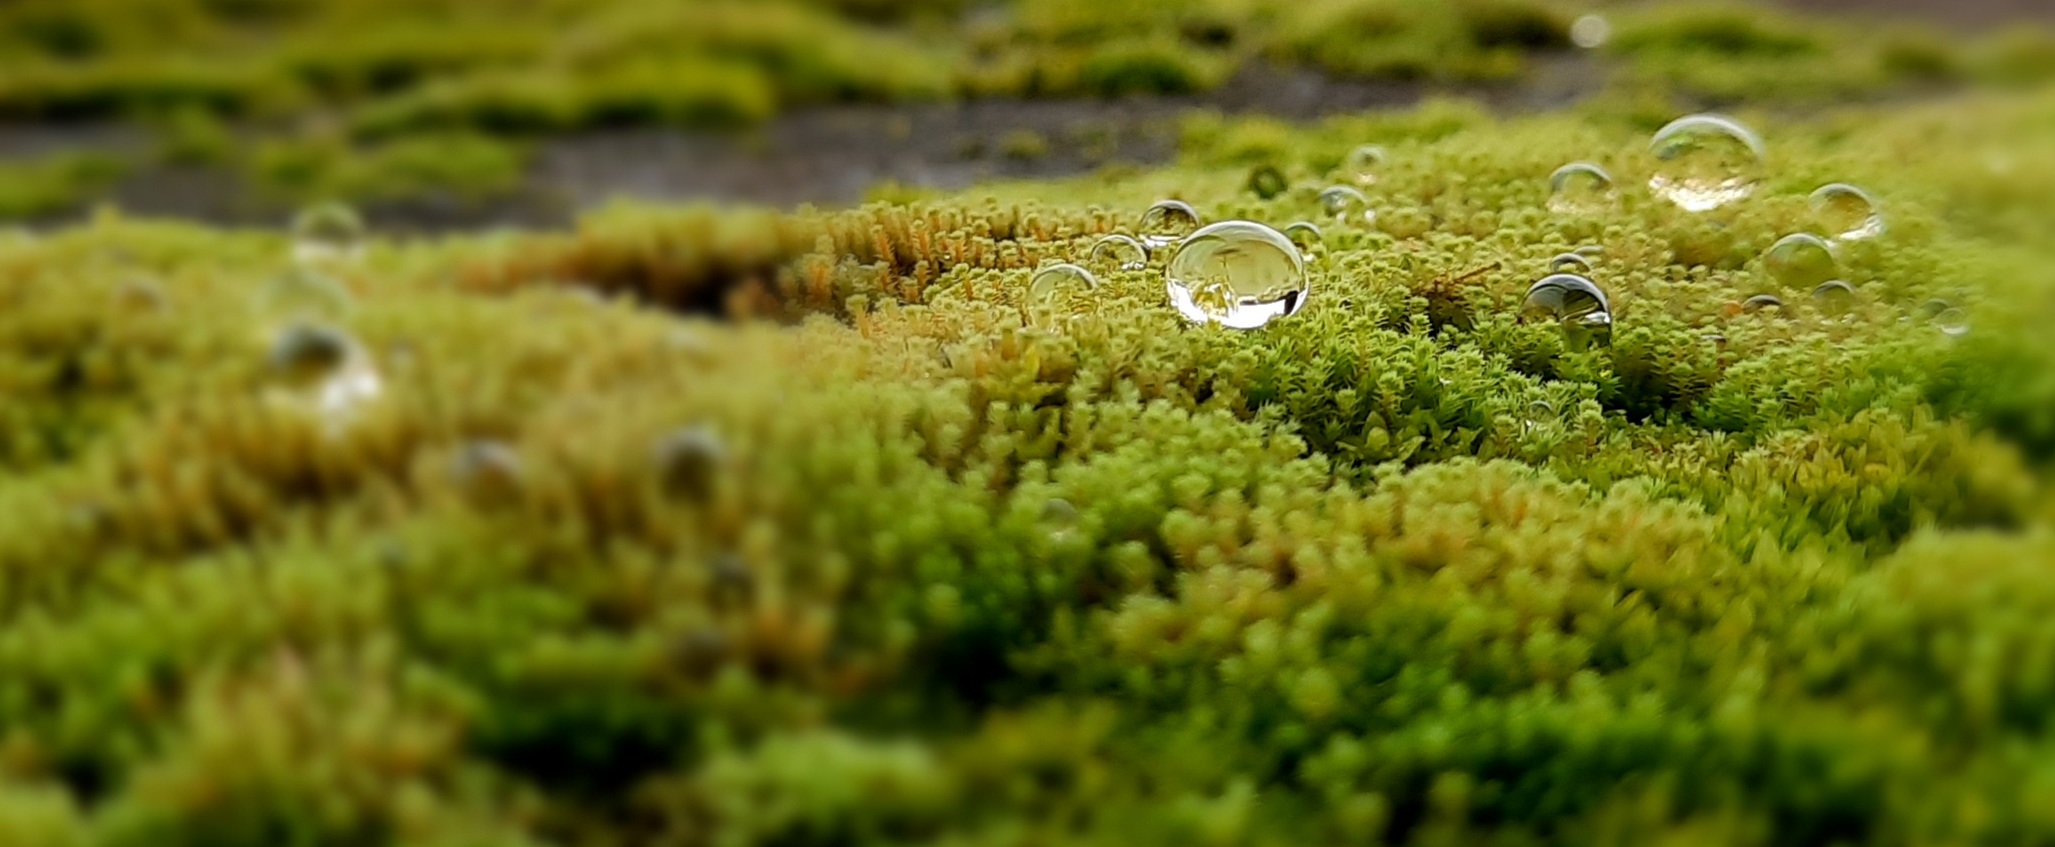 Macro photo of green moss with water droplets on its surface